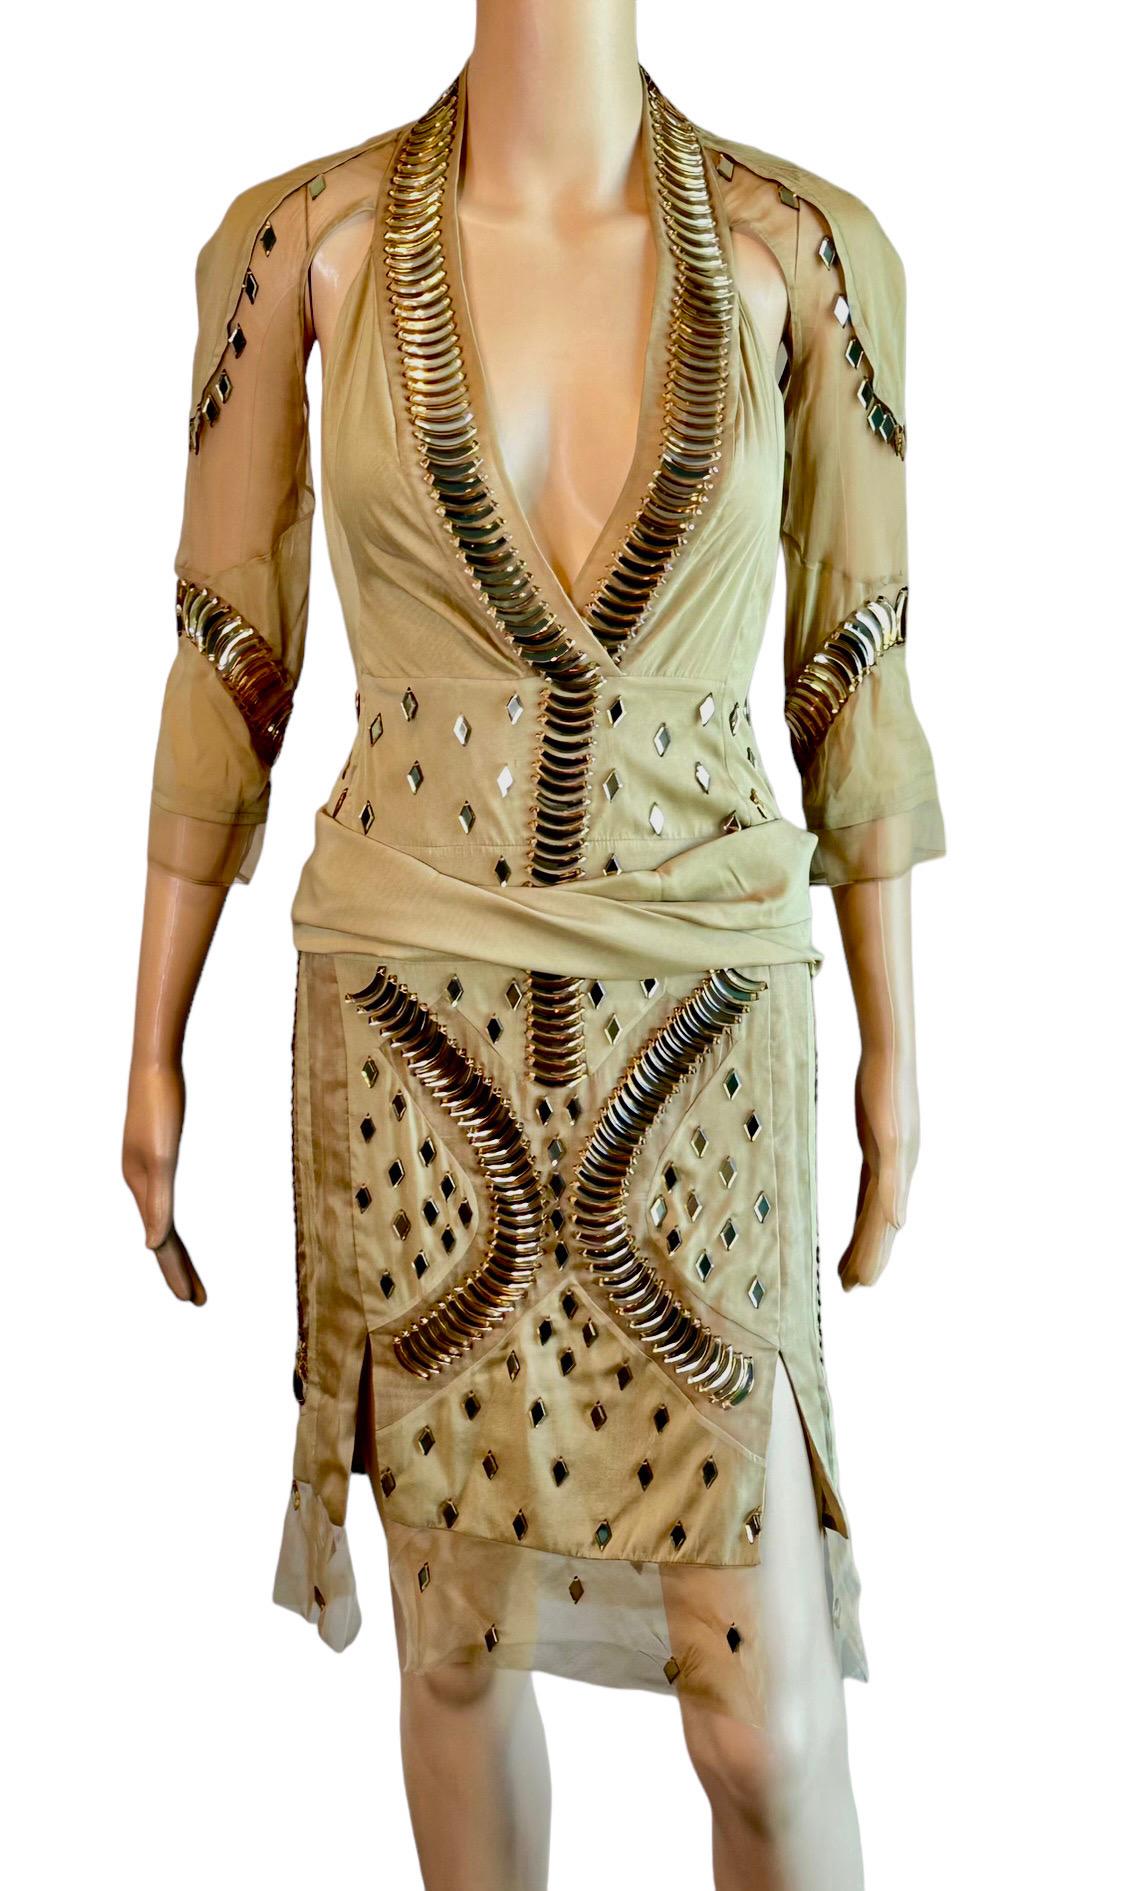 Gucci S/S 2005 Runway Embellished Sheer Plunging Neckline Cutout Back Mini Dress In Good Condition In Naples, FL